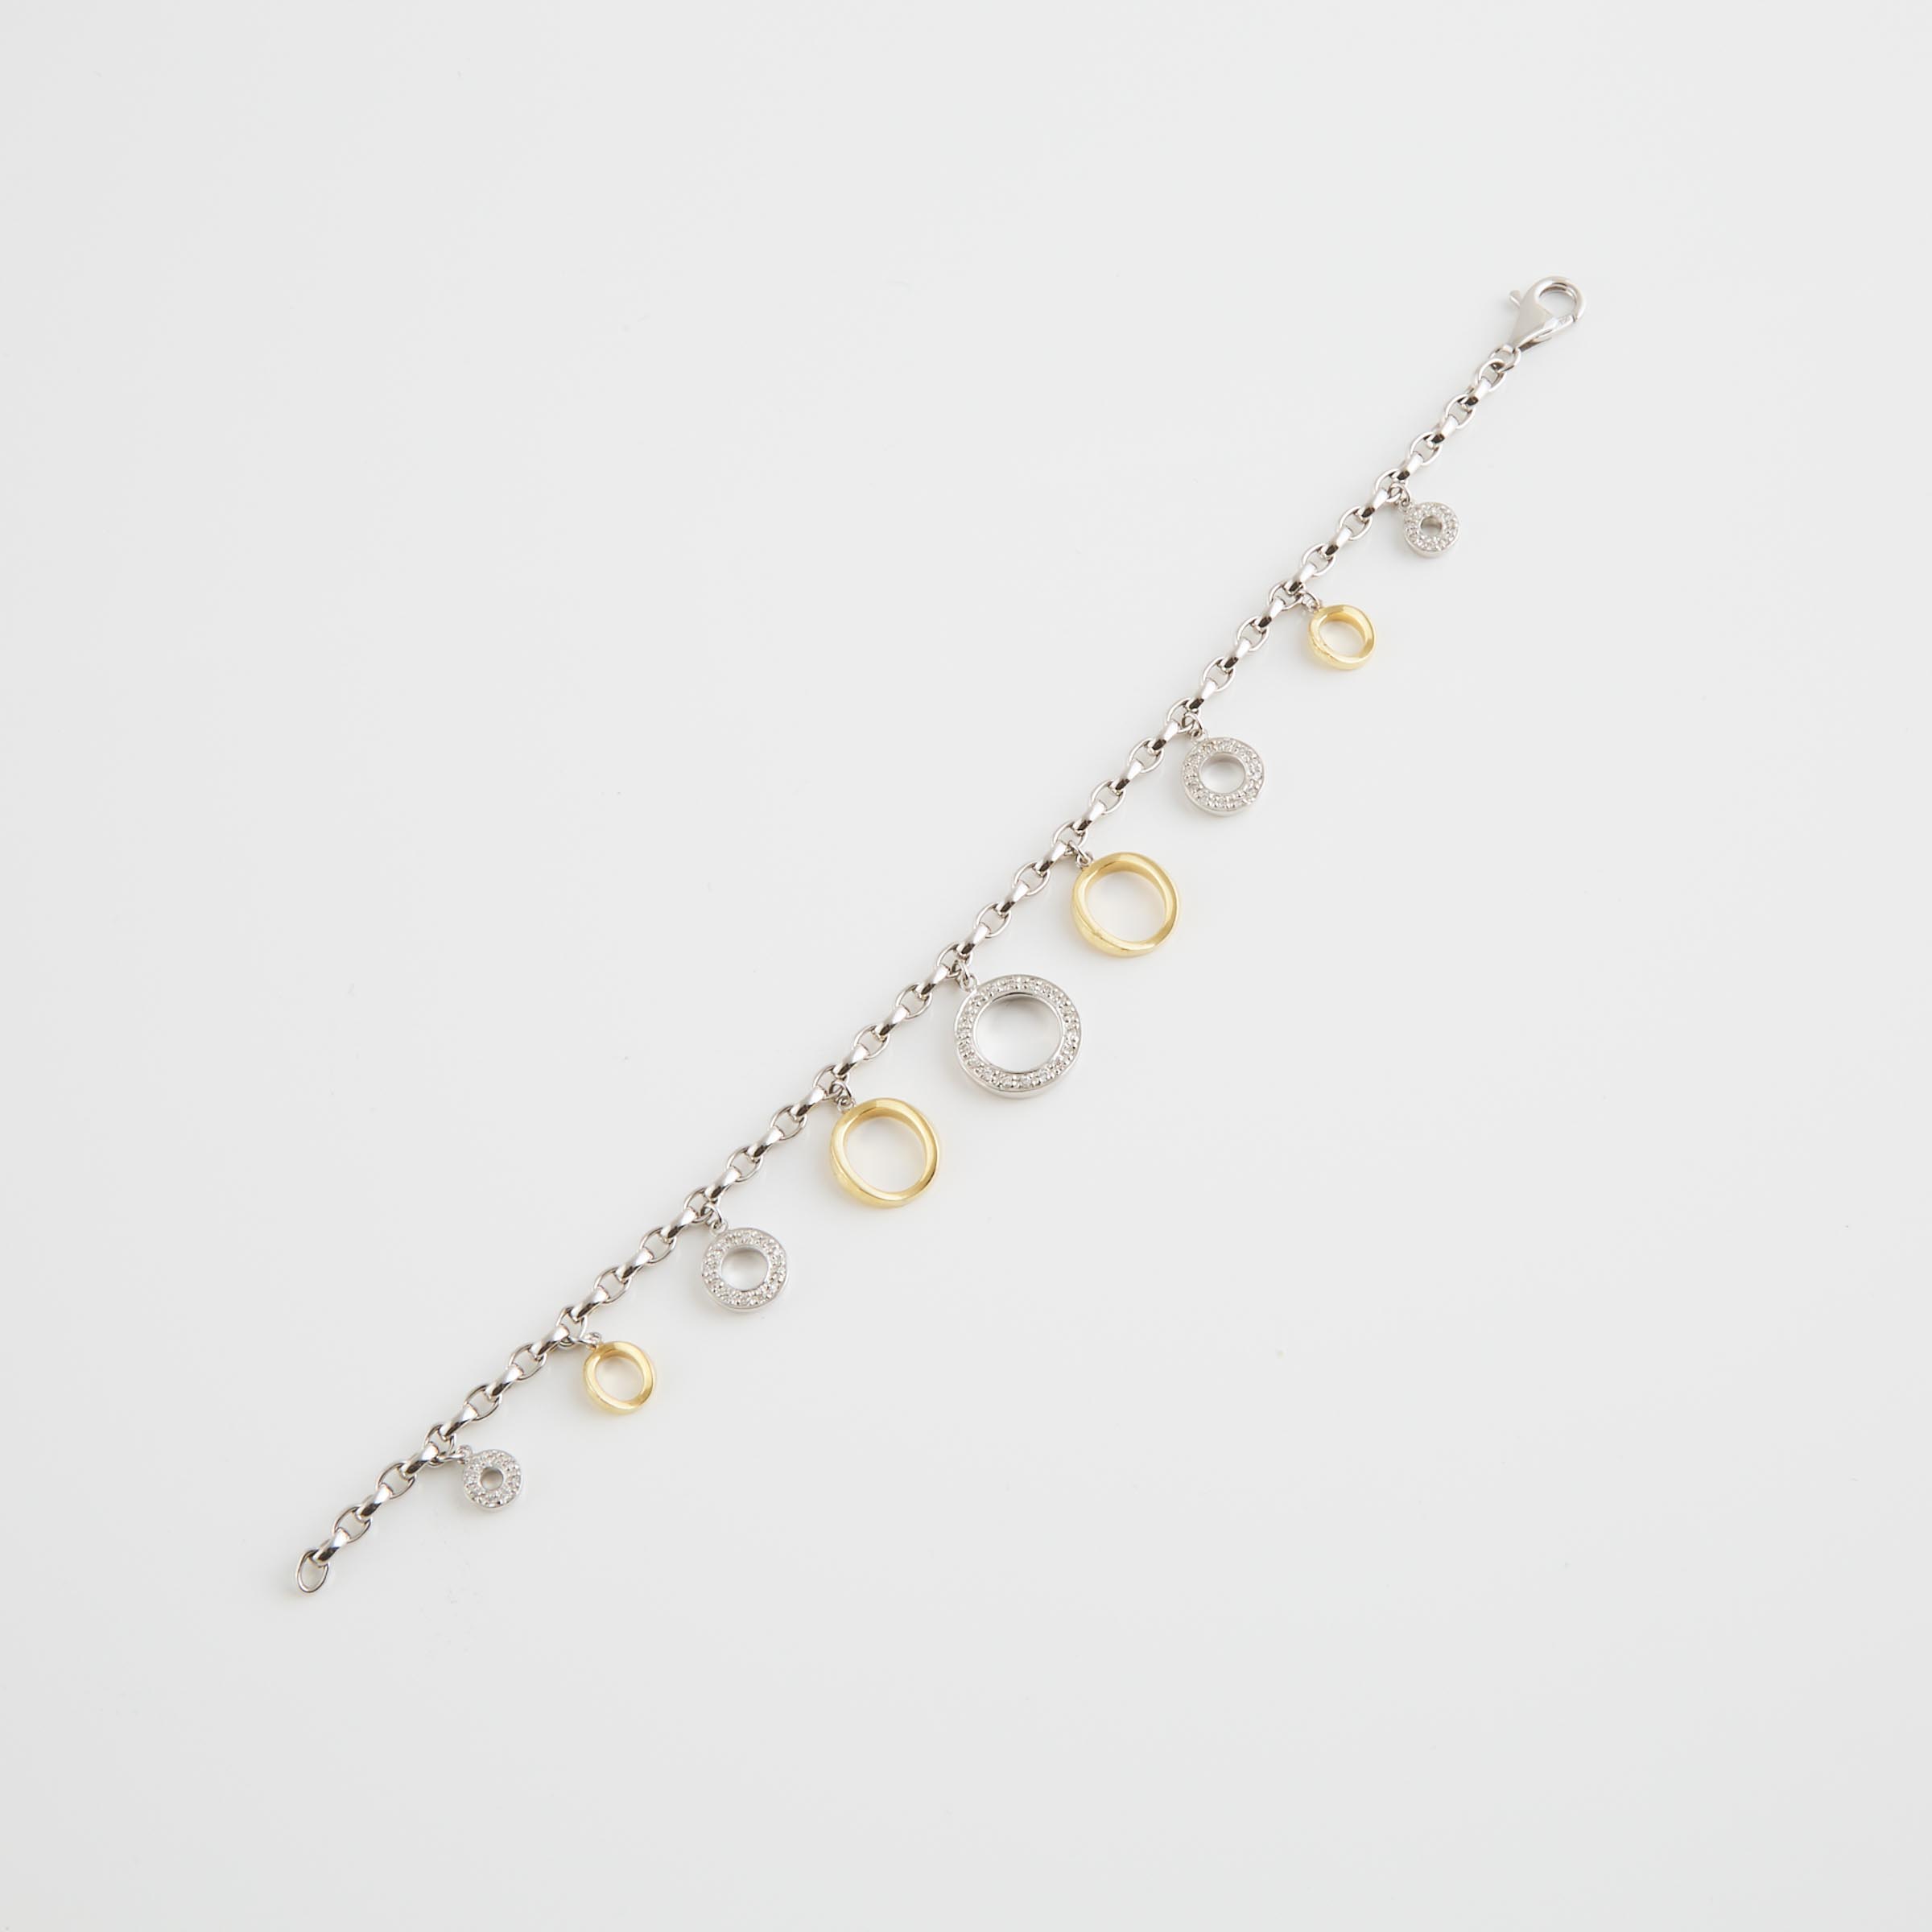 18k White And Yellow Gold Charm Bracelet